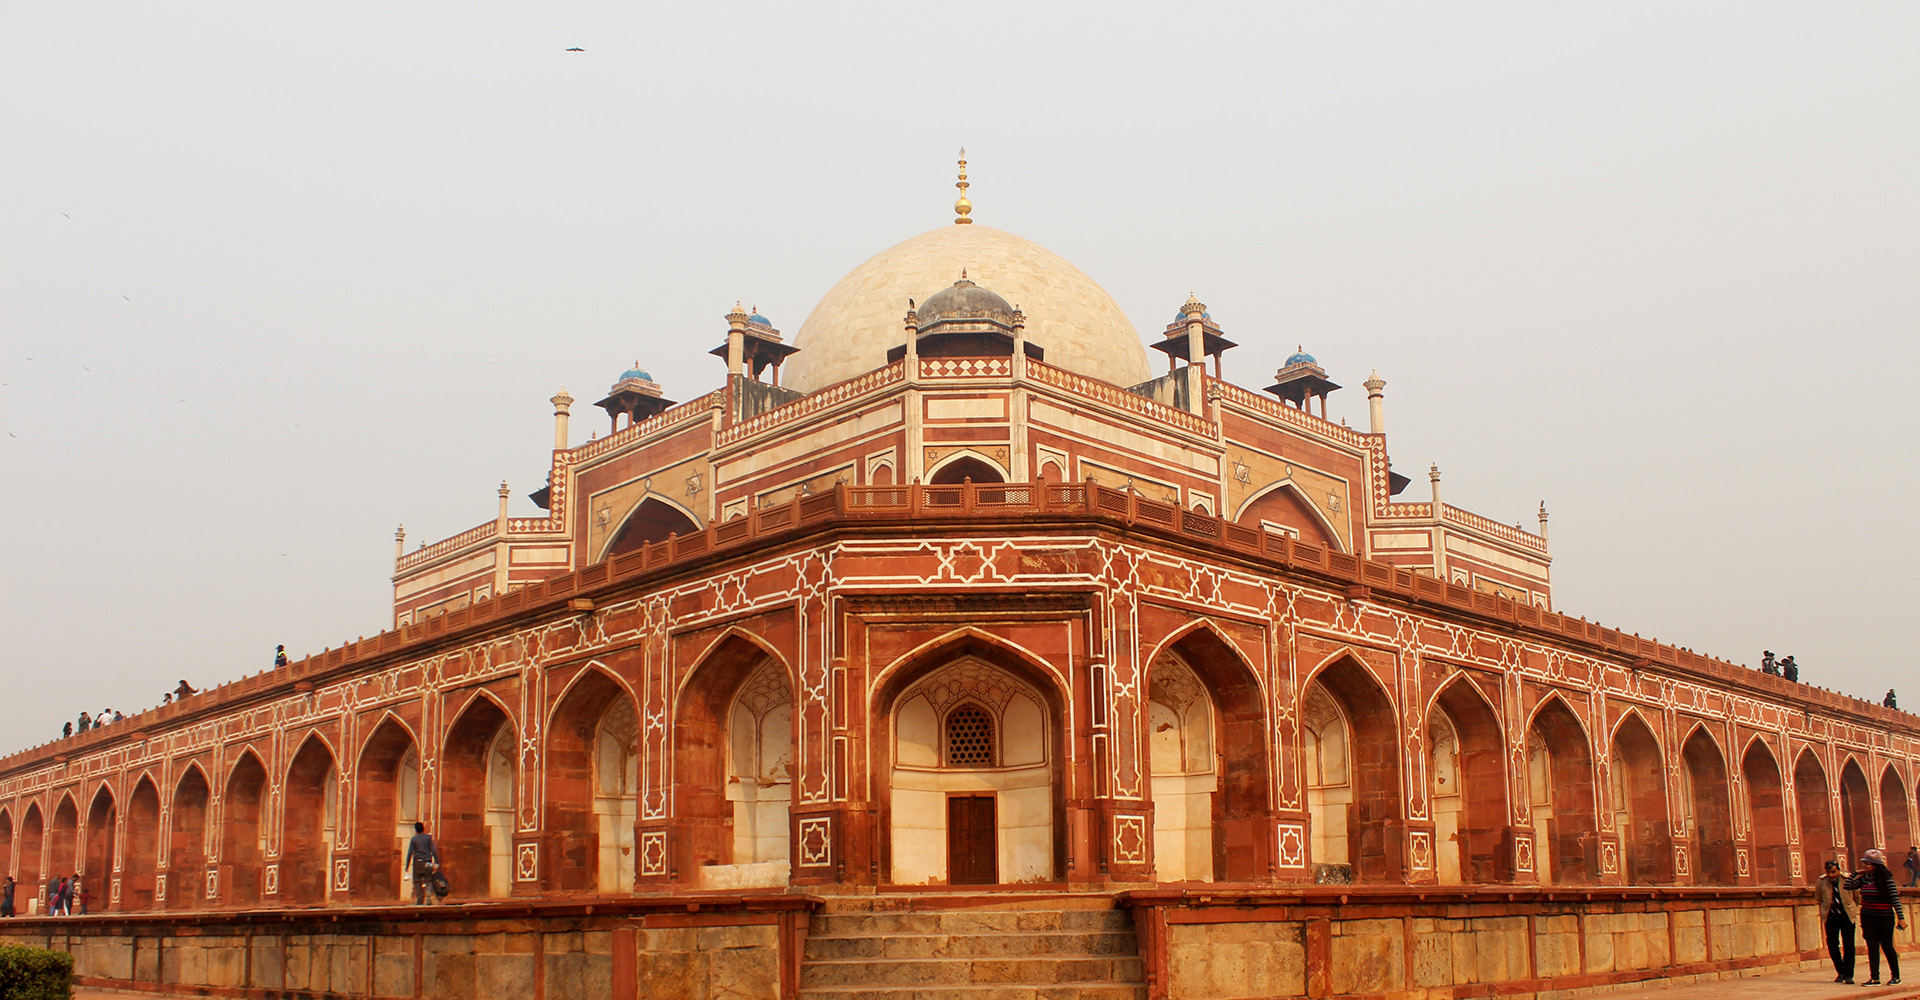 Taj Mahal Architecture Origins In Humayuns Tomb Video • Approach Guides